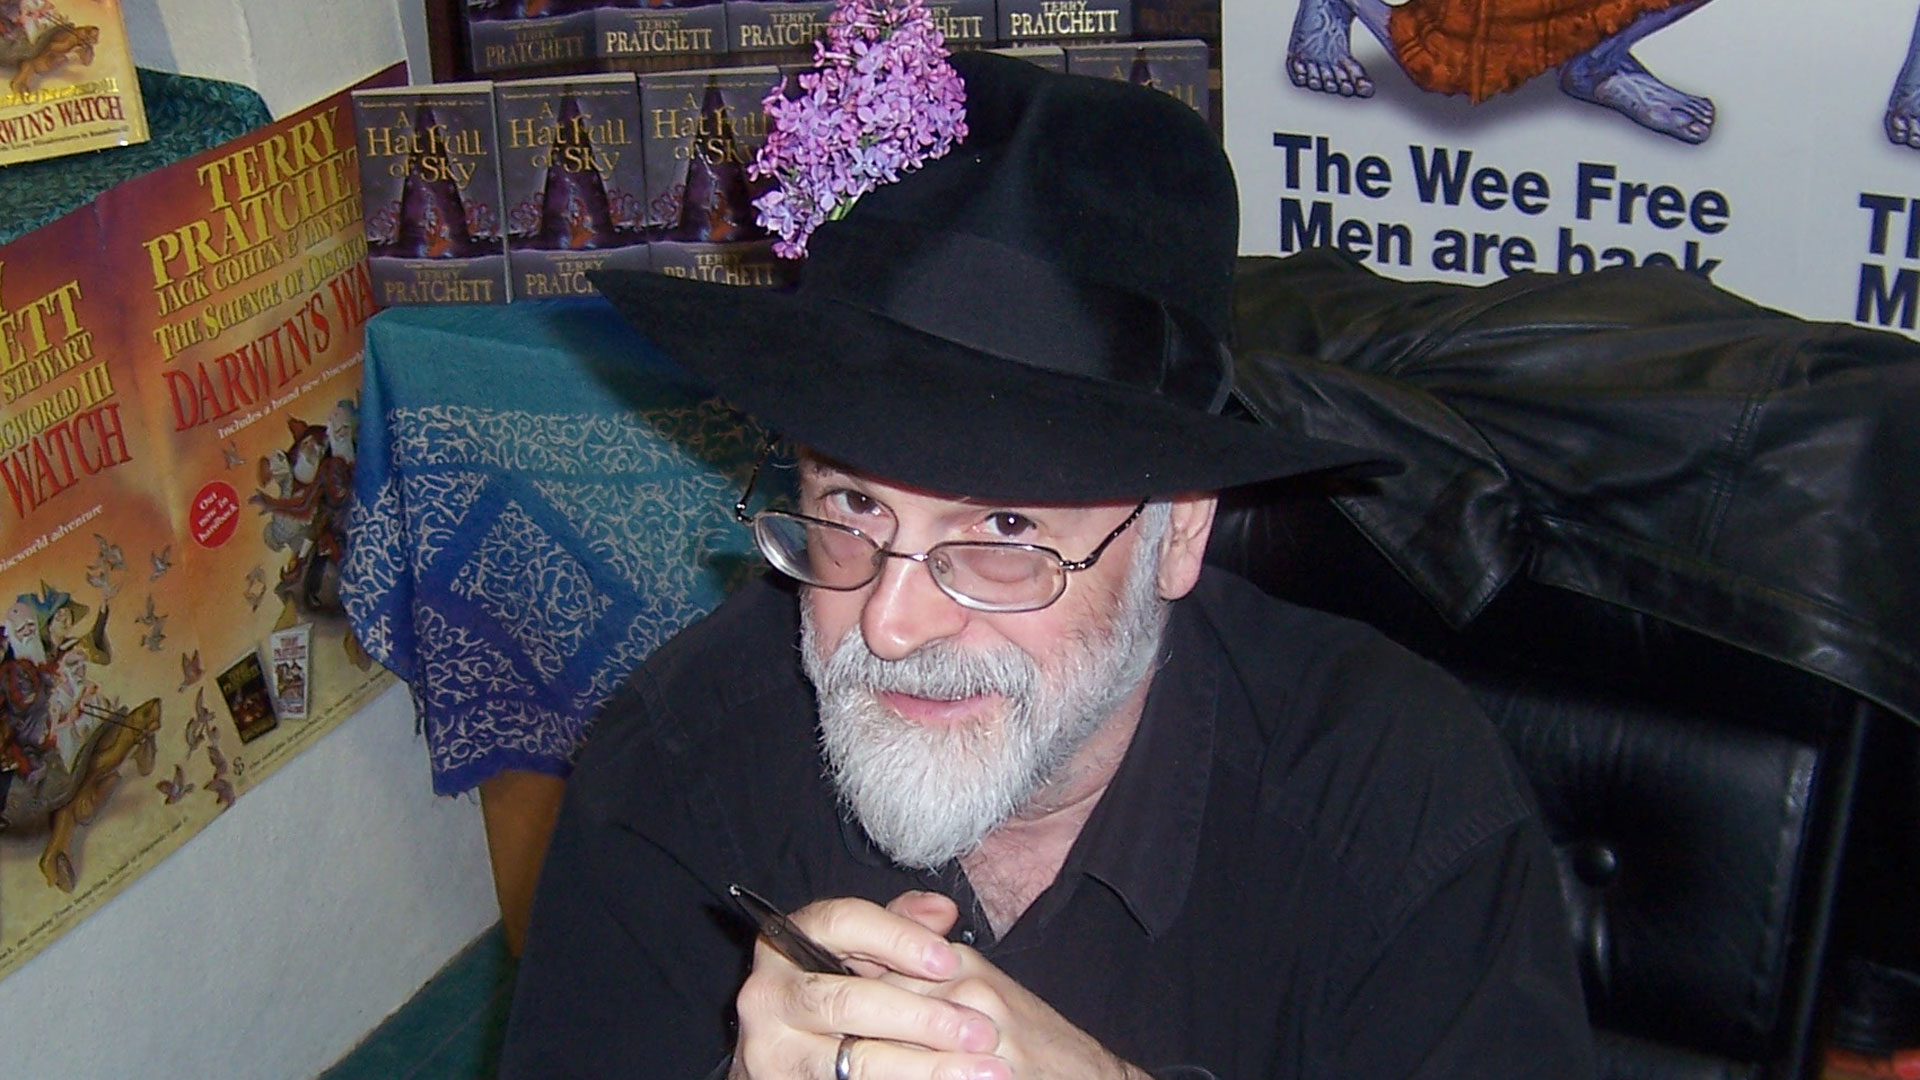 Unlike Enid Blyton, Terry Pratchett is not likely to get cancelled any time soon